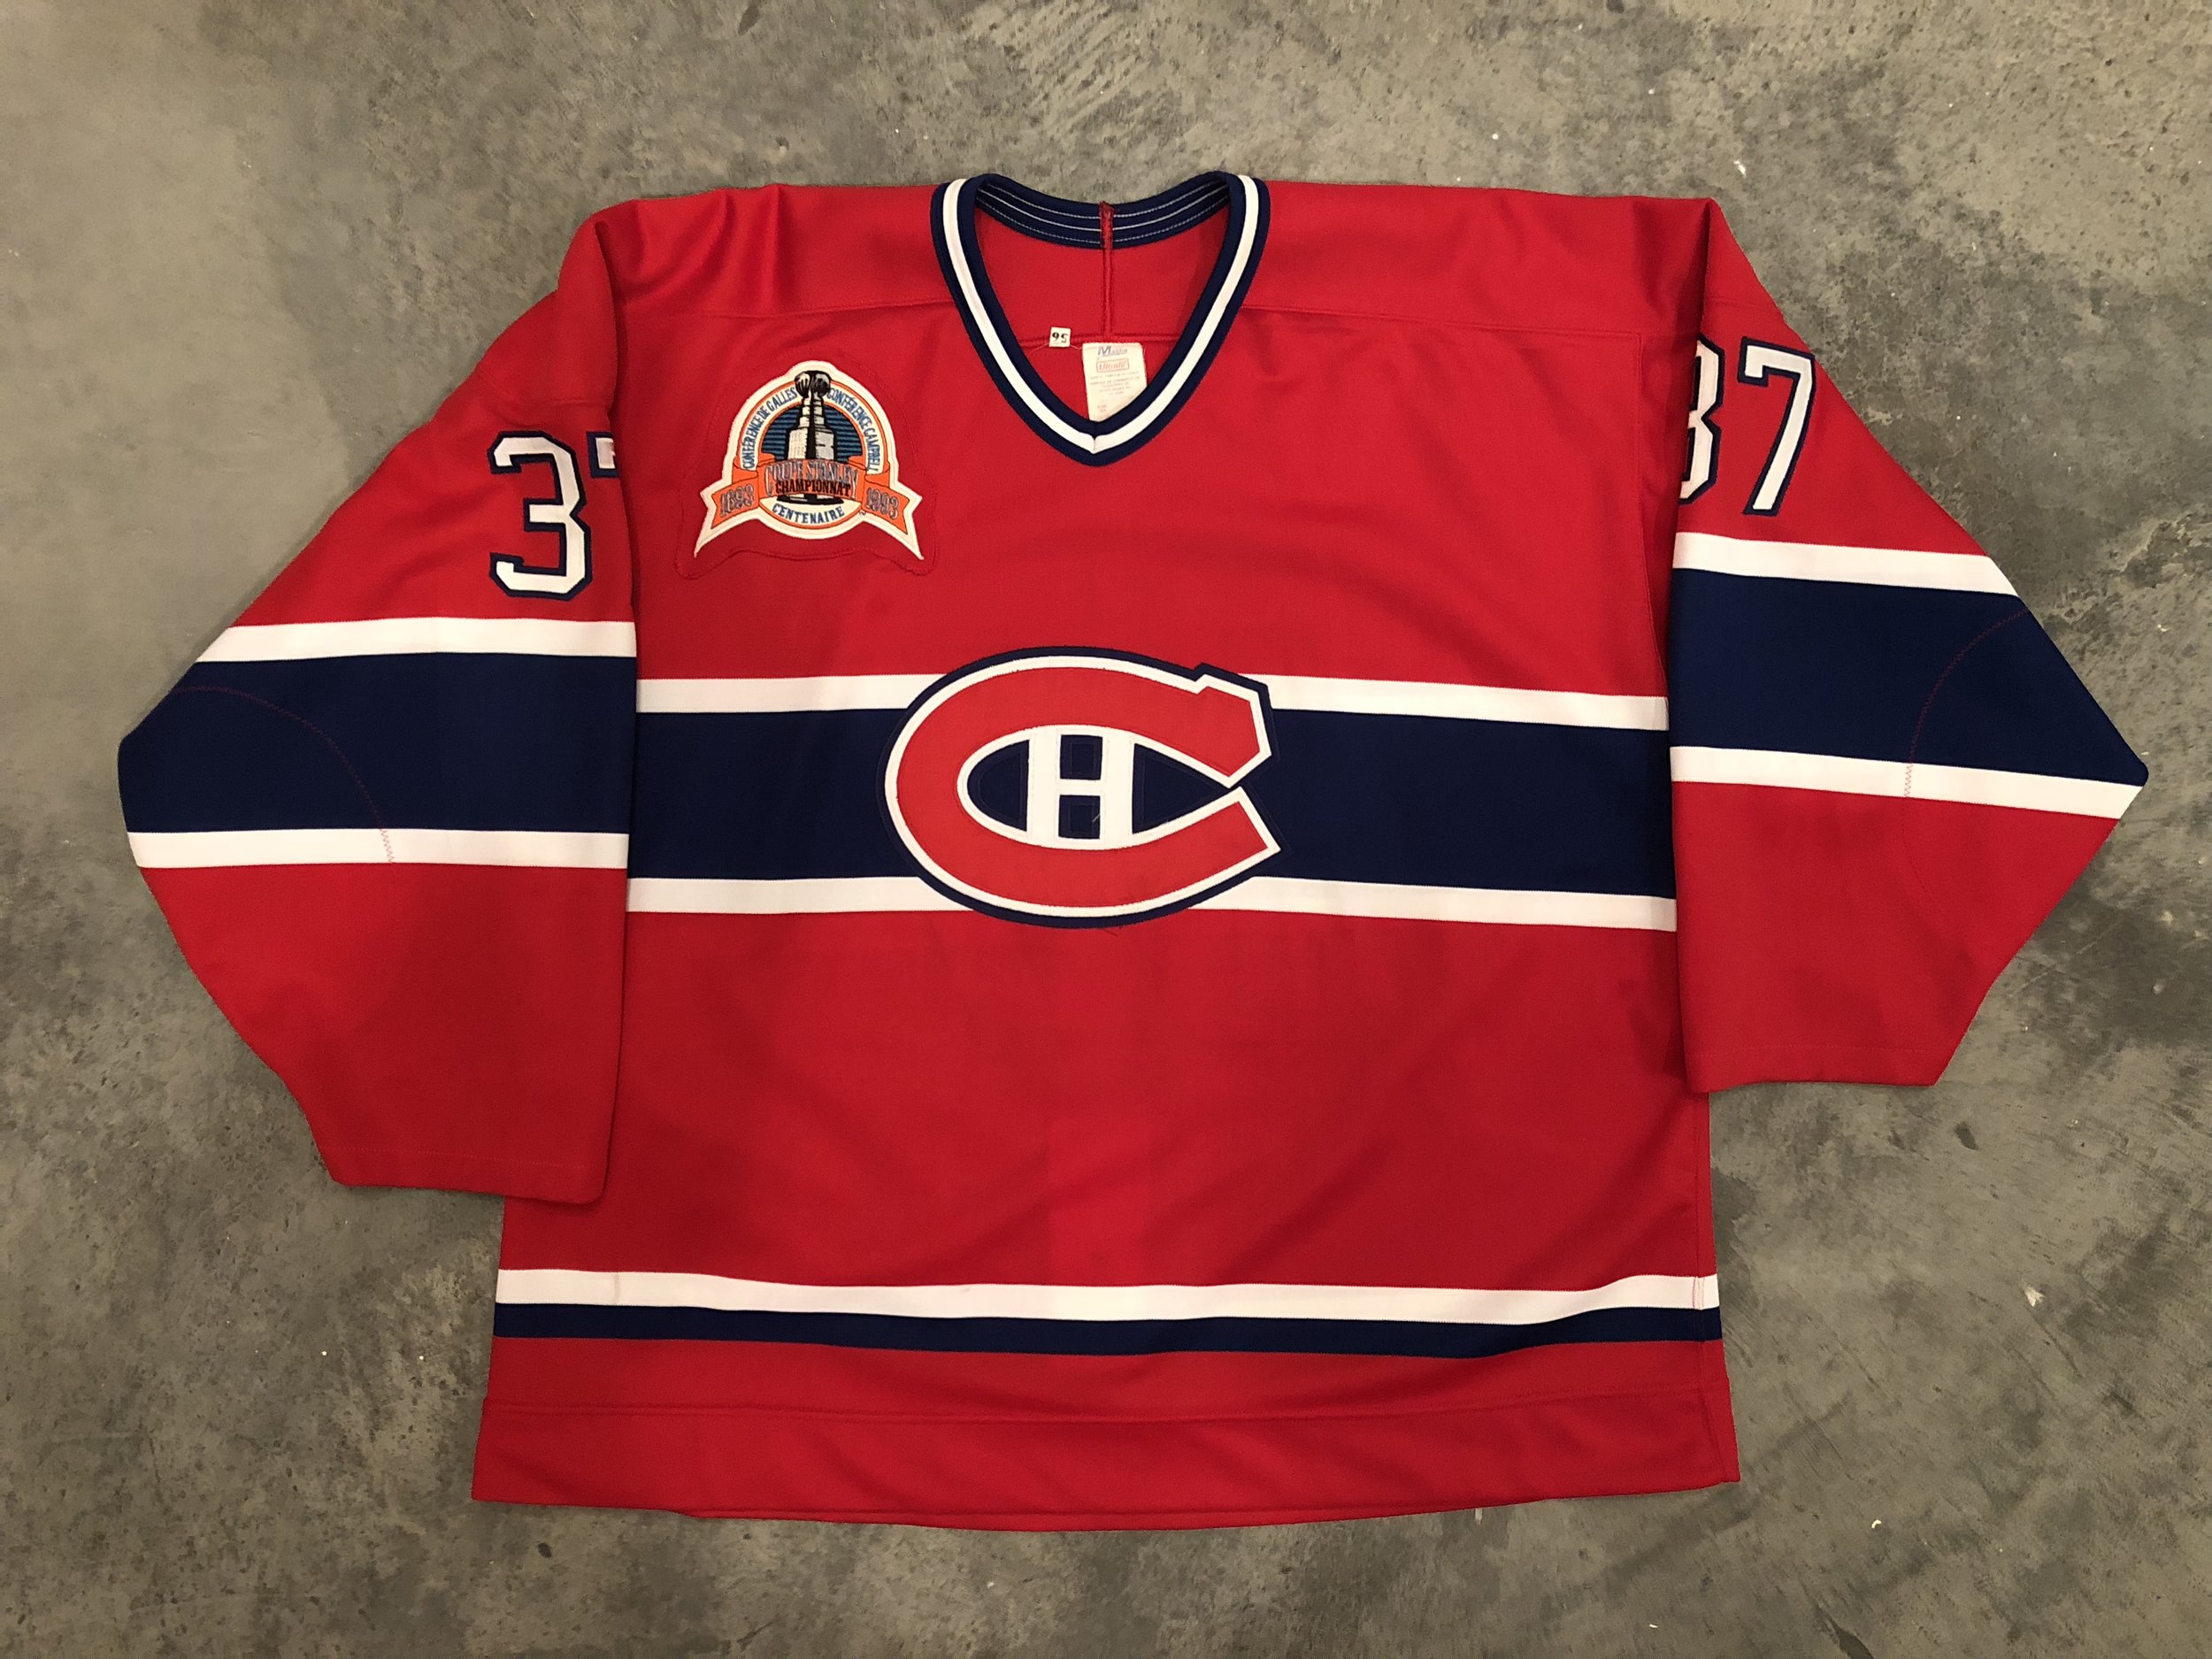 Montreal Canadiens Stanley Cup champions jersey